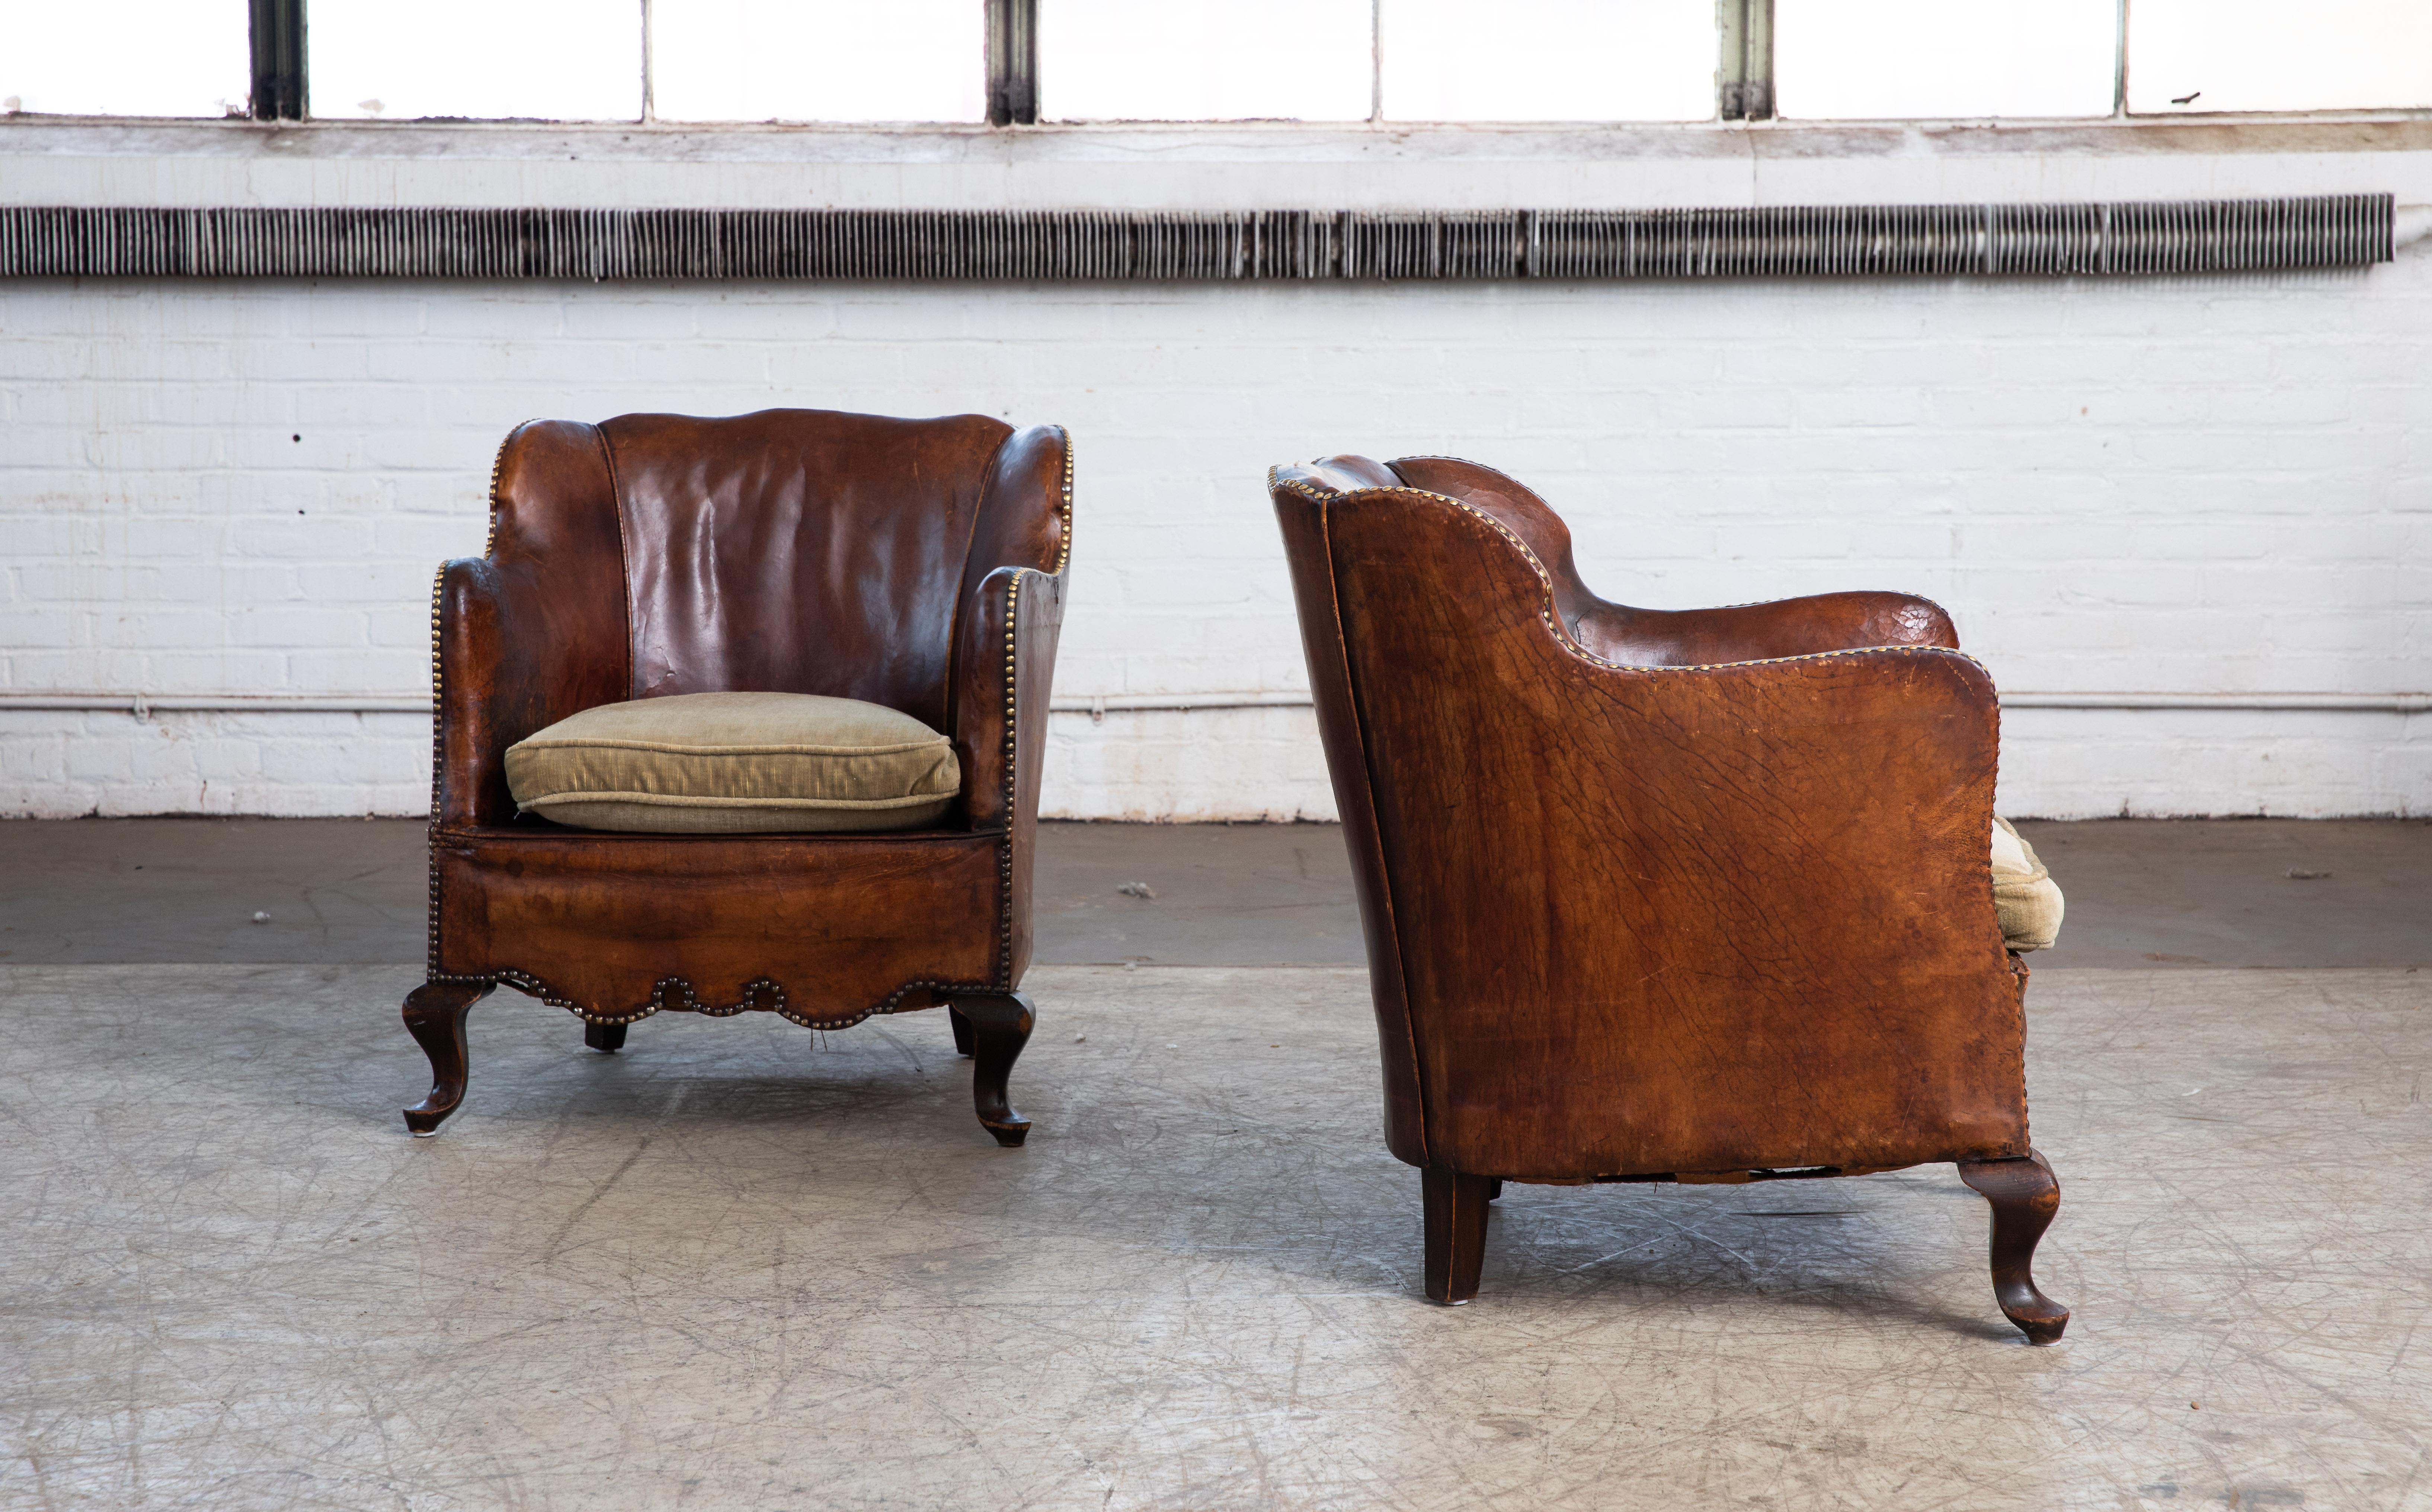 Pair of Classic Danish Club or Library Chairs in Cognac Color Patinated Leather 1